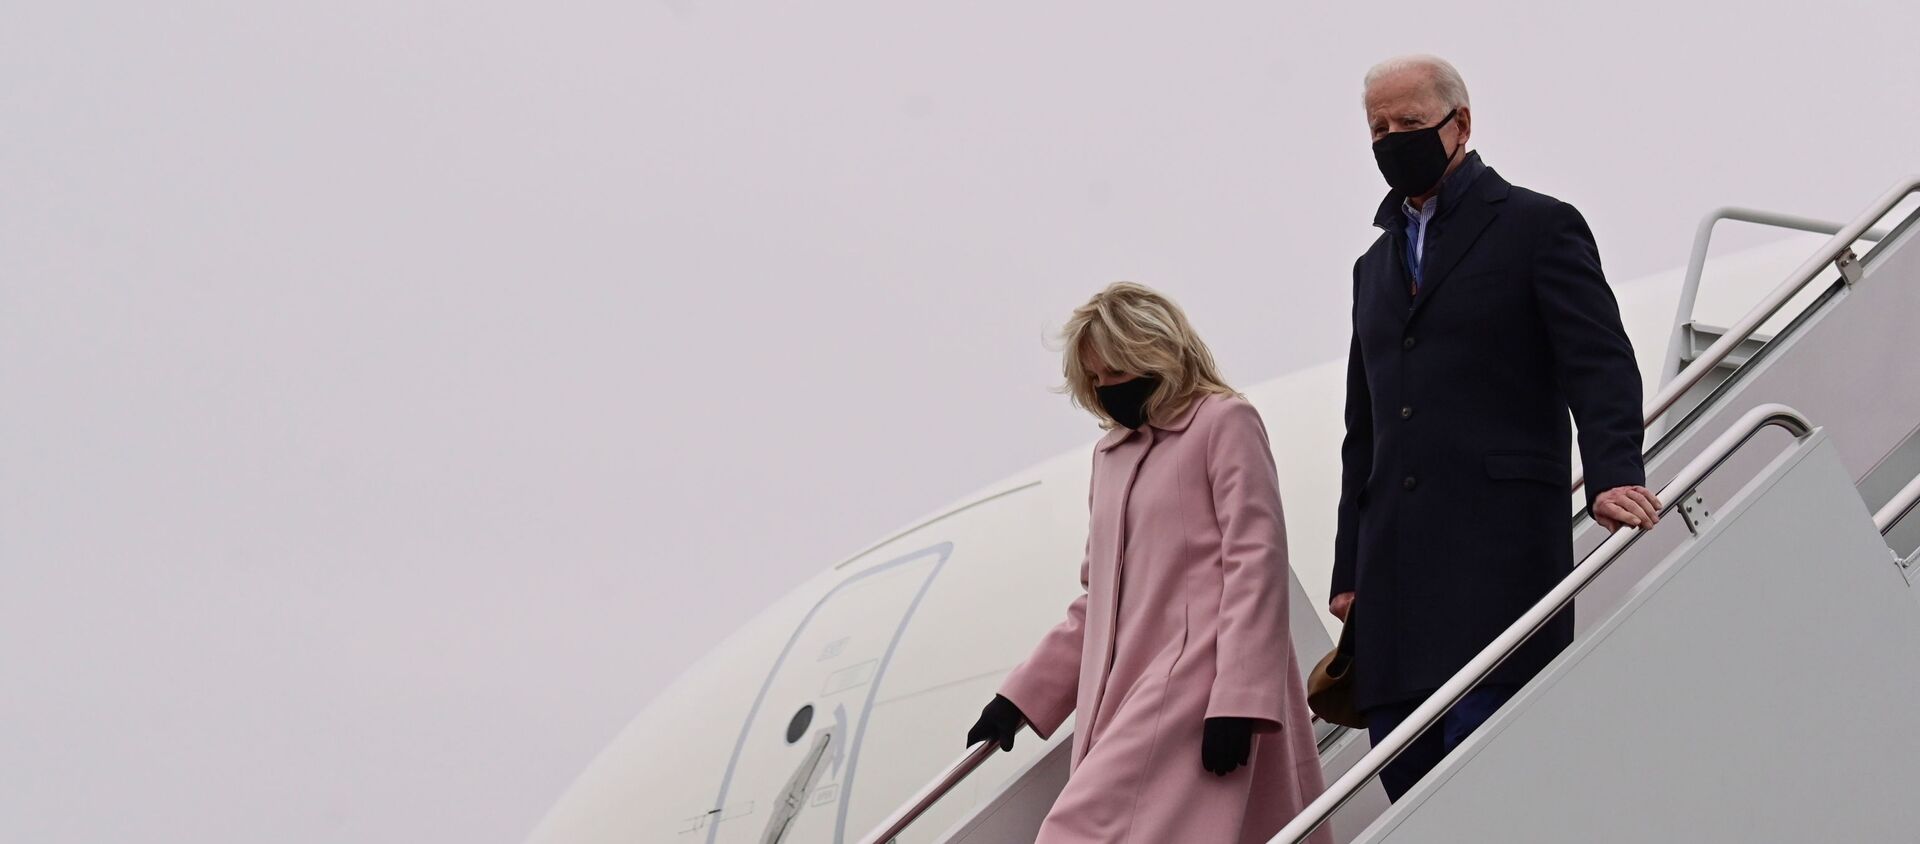 U.S. President Joe Biden and his wife Jill disembark from Air Force One after a trip to Camp David, at Joint Base Andrews, Maryland, U.S., February 15, 2021. - Sputnik International, 1920, 23.02.2021